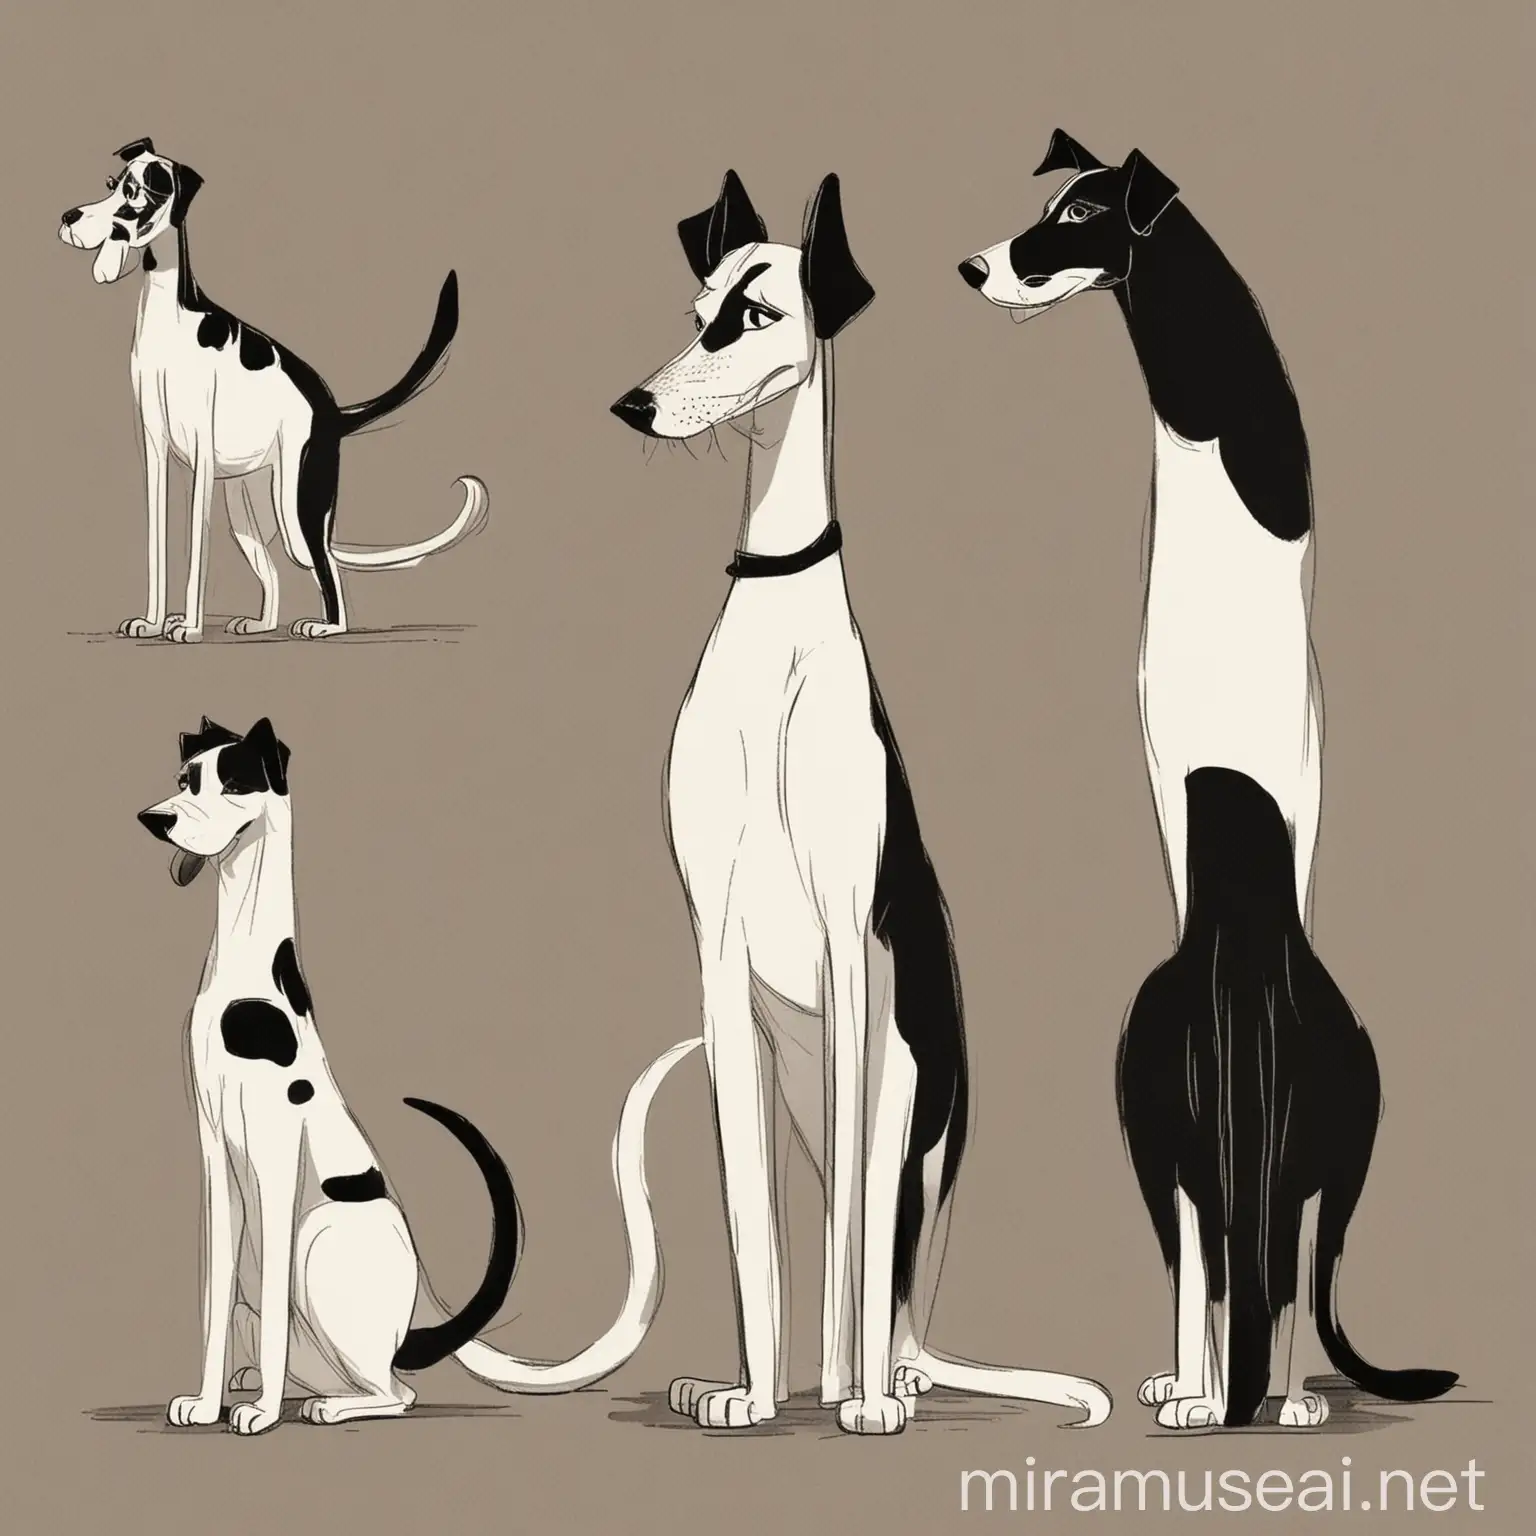 Design a black and white illustration, very simple, of a dog with a long neck, in different cute poses, Use a Mid-Century Modern style use the same style in this image with the cats as a reference to make multiple poses of dogs